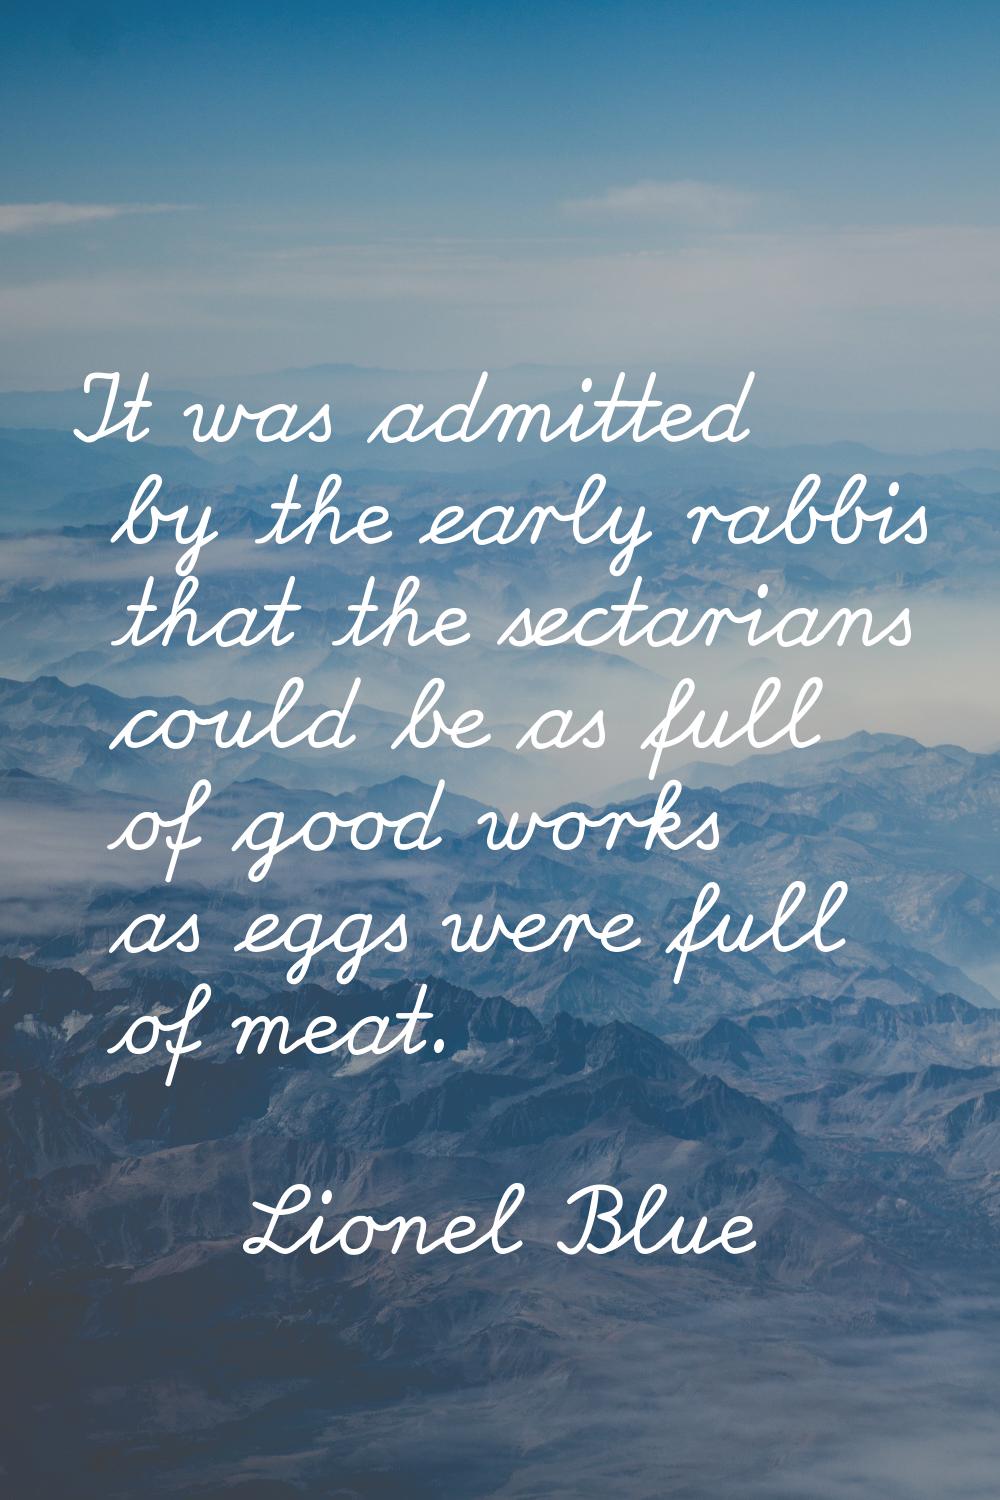 It was admitted by the early rabbis that the sectarians could be as full of good works as eggs were